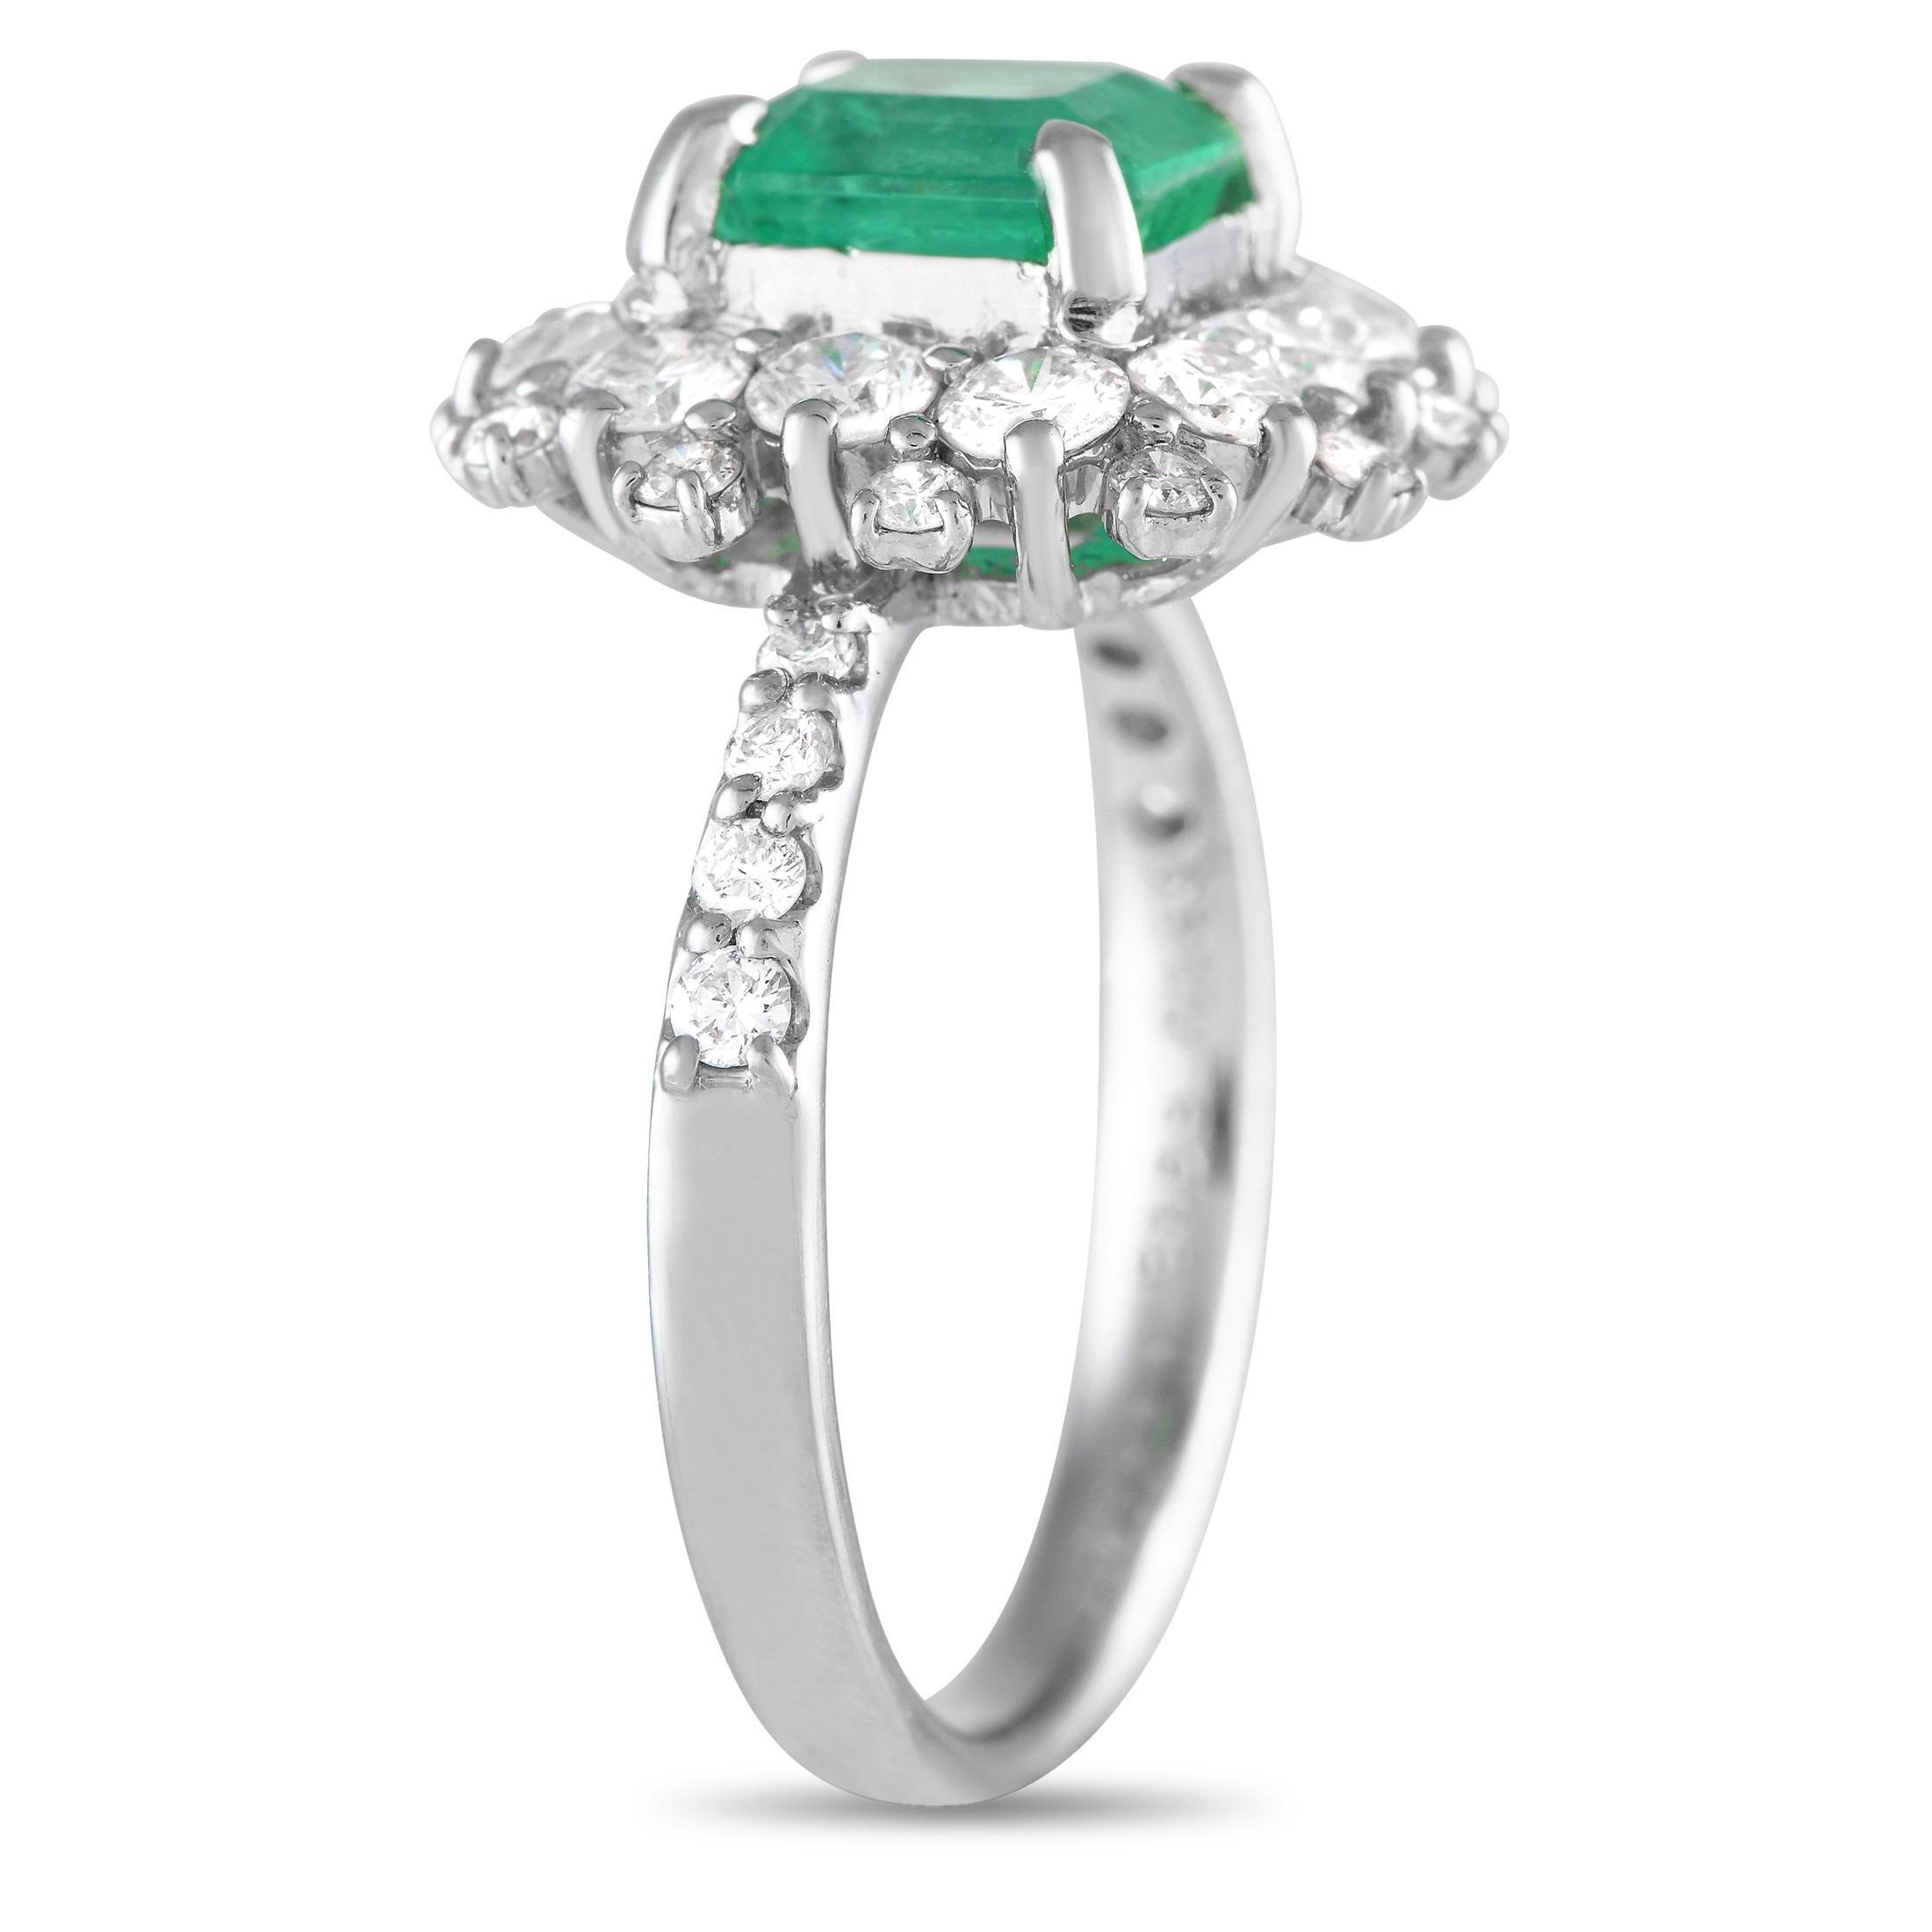 Fresh and feminine, this diamond and emerald ring makes an unconventional yet undeniably stunning engagement ring. It features a 950 platinum band with four tapering diamonds on each shoulder. A 1.53 carat emerald sits on top, surrounded by charming